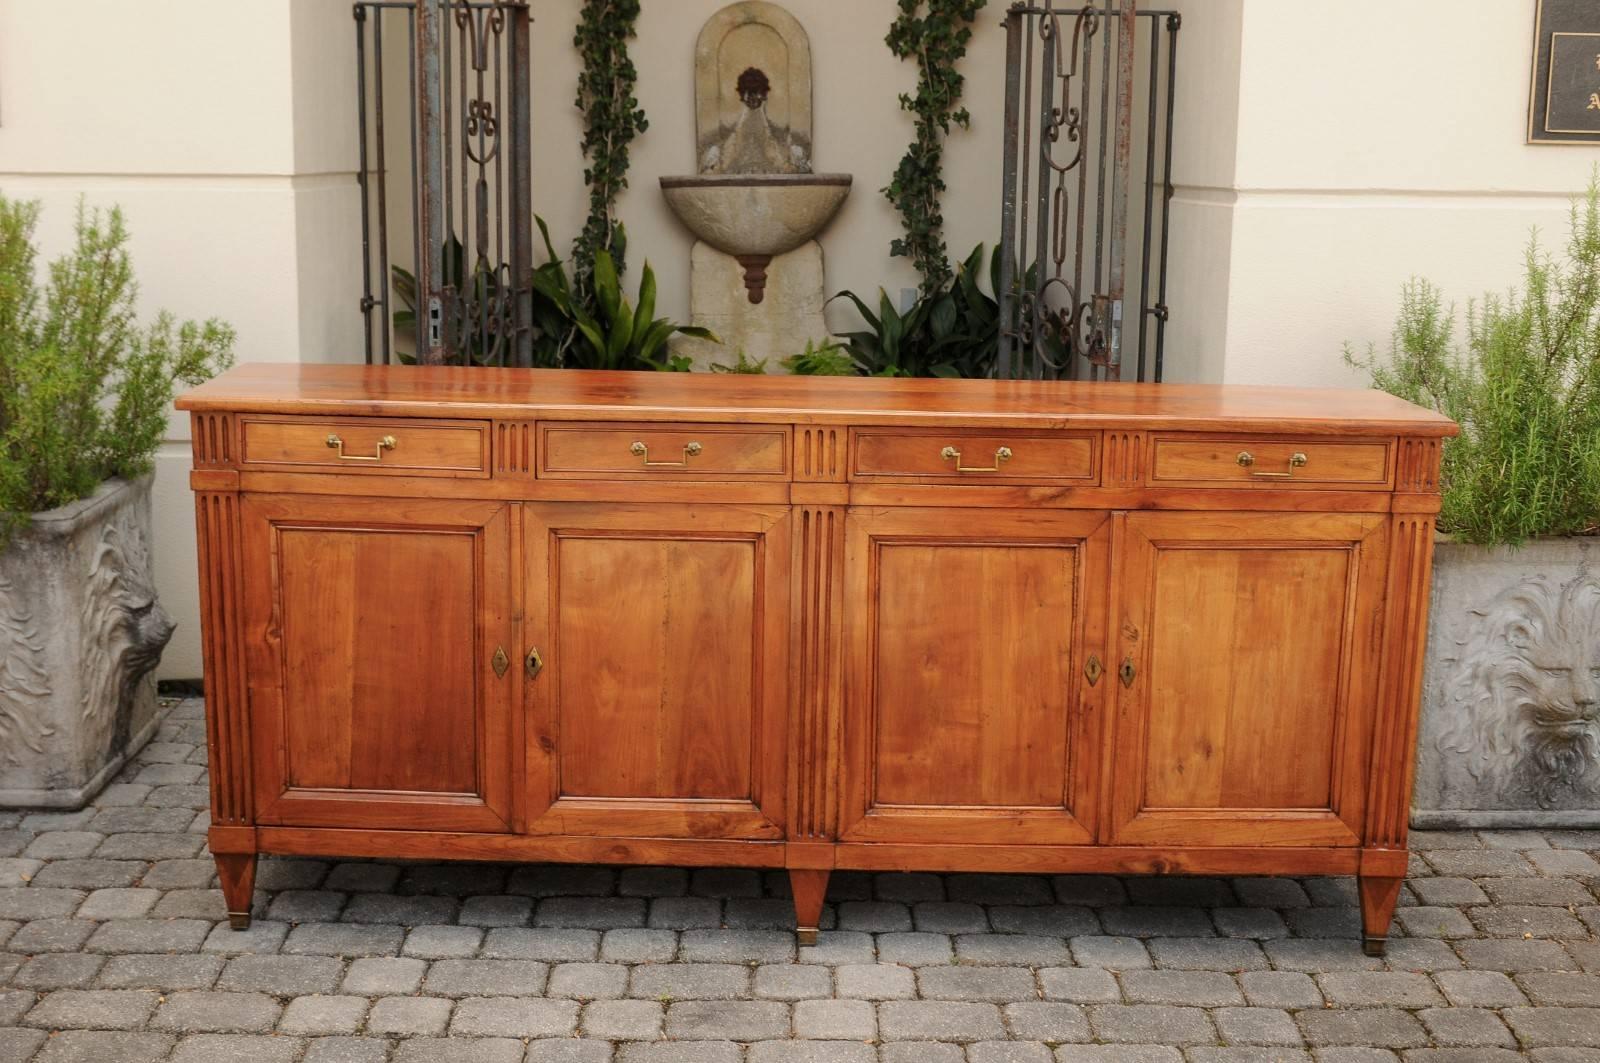 A French neoclassical style fruitwood enfilade from the second half of the 19th century, with four drawers over four doors and fluted accents. This exquisite French enfilade features a rectangular top, sitting above four drawers, adorned with linear